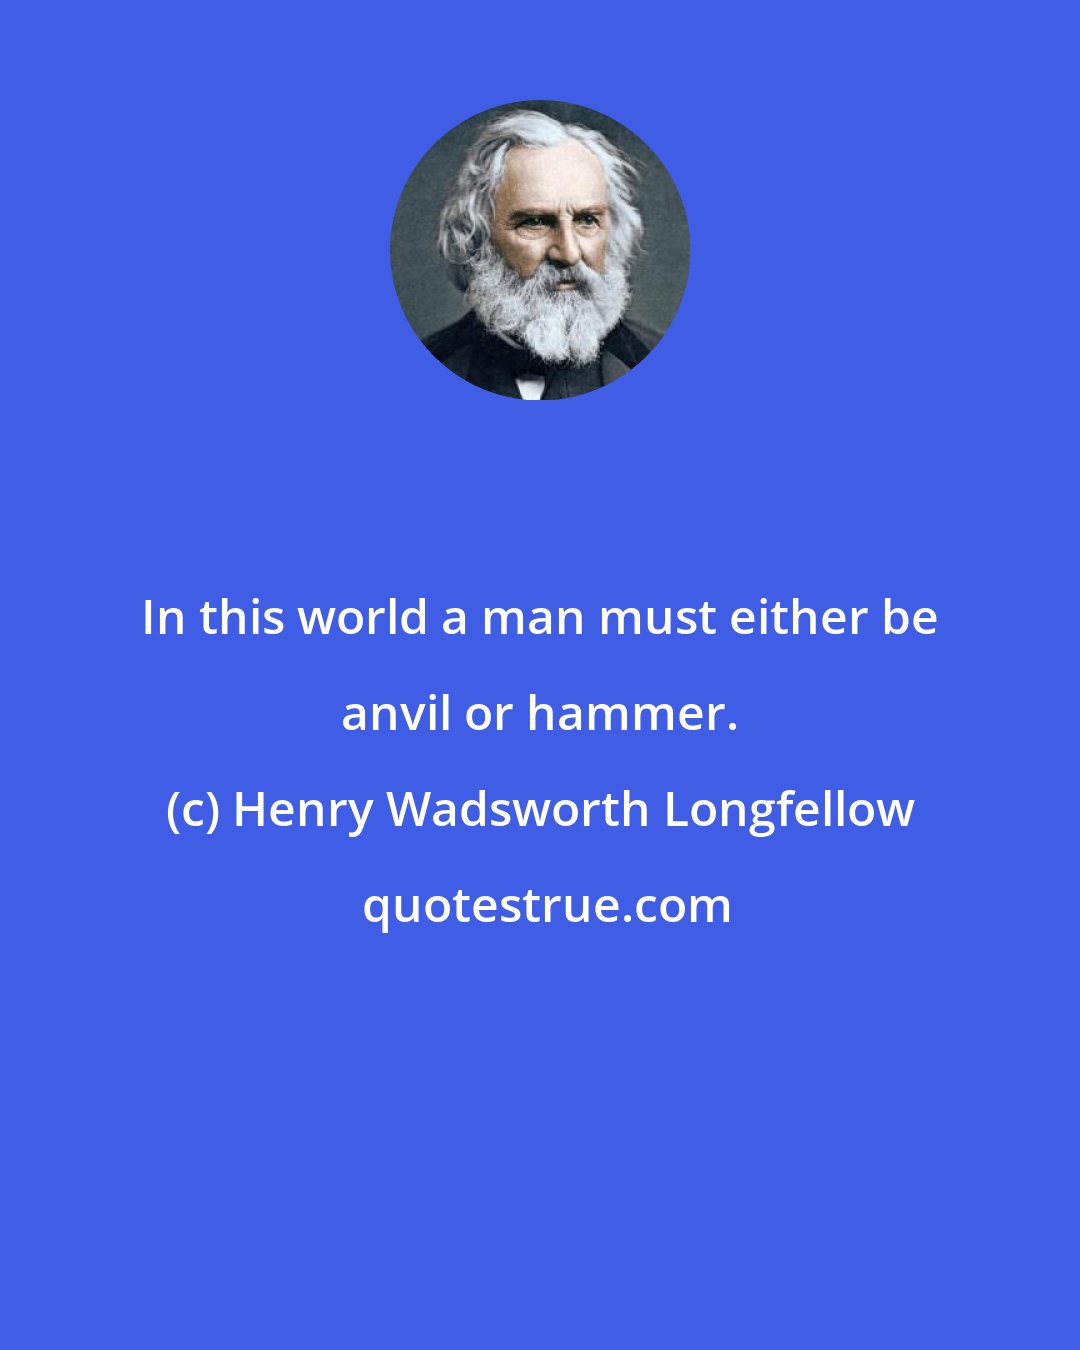 Henry Wadsworth Longfellow: In this world a man must either be anvil or hammer.